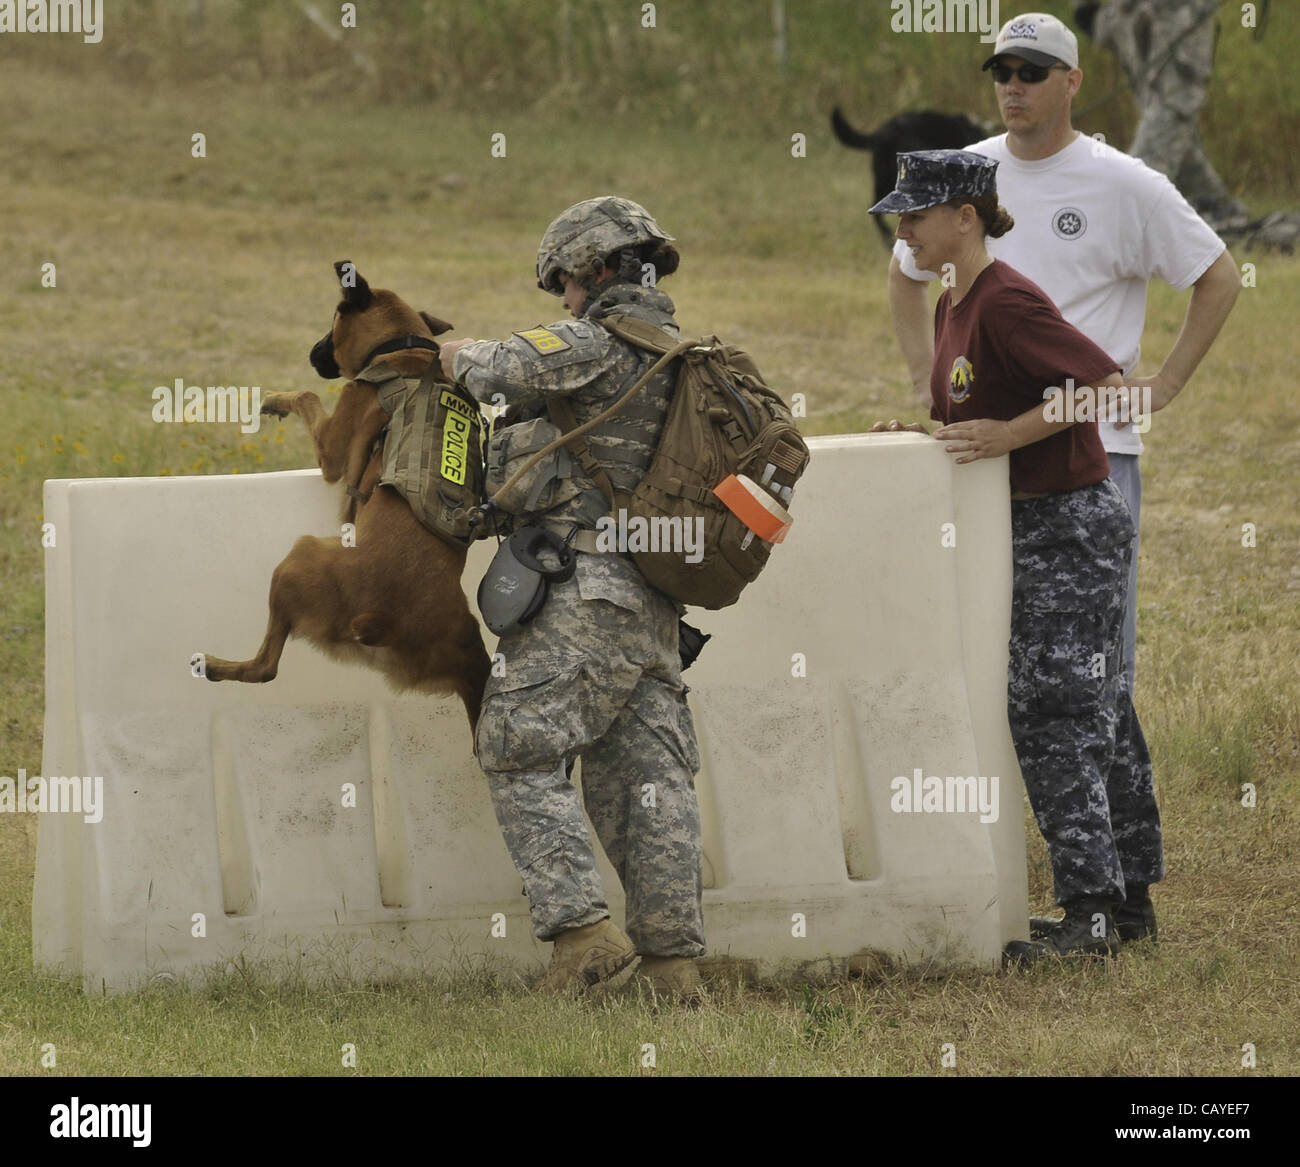 May 5, 2012 - DoD K9 Trials-May 4, 2012-Lackland Air Force Base-San Antonio, Texas--With the encouragement of other soldier, Sgt. Elizabeth Wenke lifts her dog over an obstacle during the 6 mile Iron Dog competition during the Department of Defense K9 Trials at Lackland Air Force Base in San Antonio Stock Photo